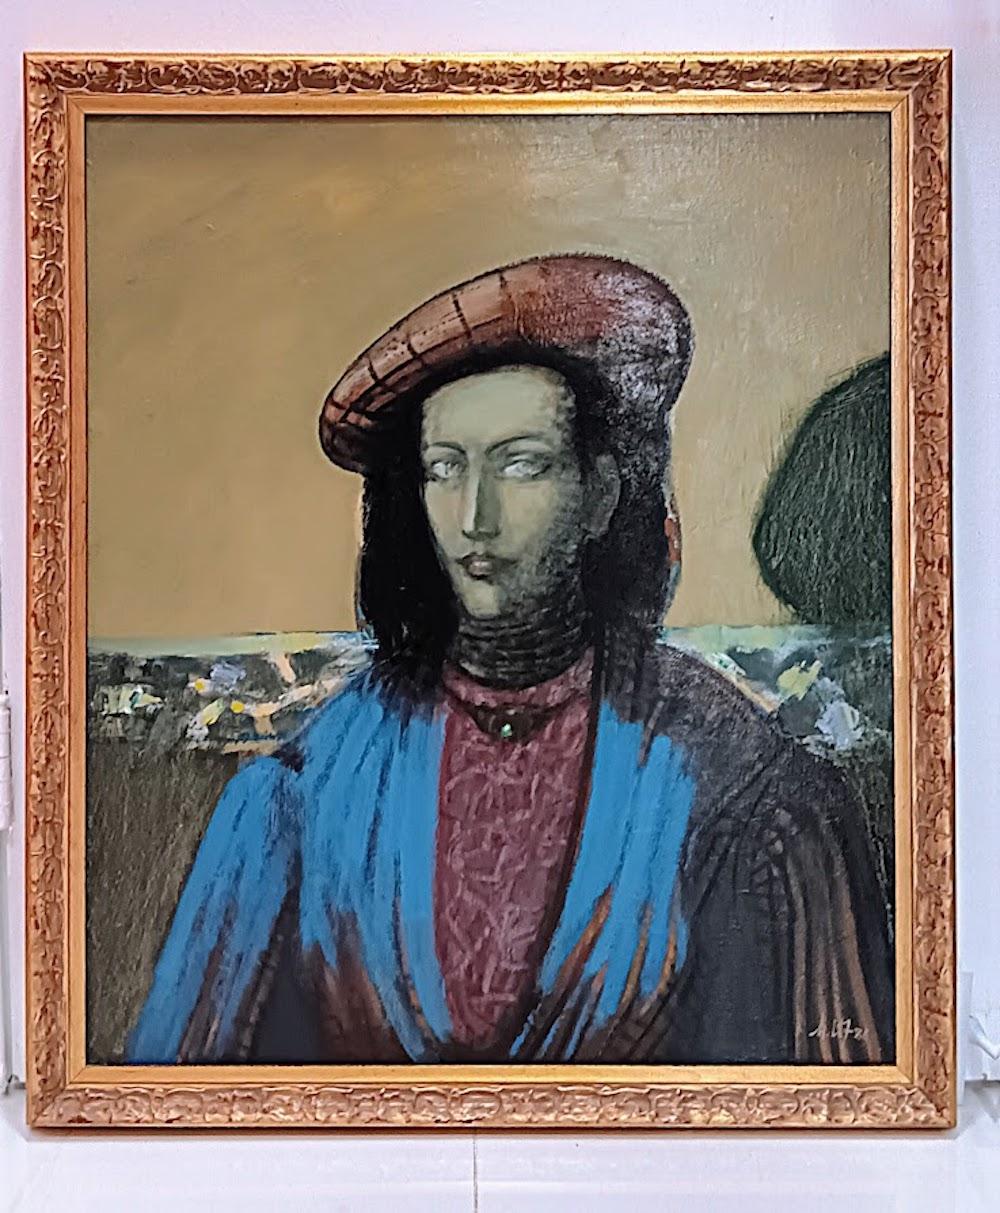 Karo Mkrchtarian Portrait Painting - Karo Mkrtchyan "Countess" Original Oil on Canvas, 1986